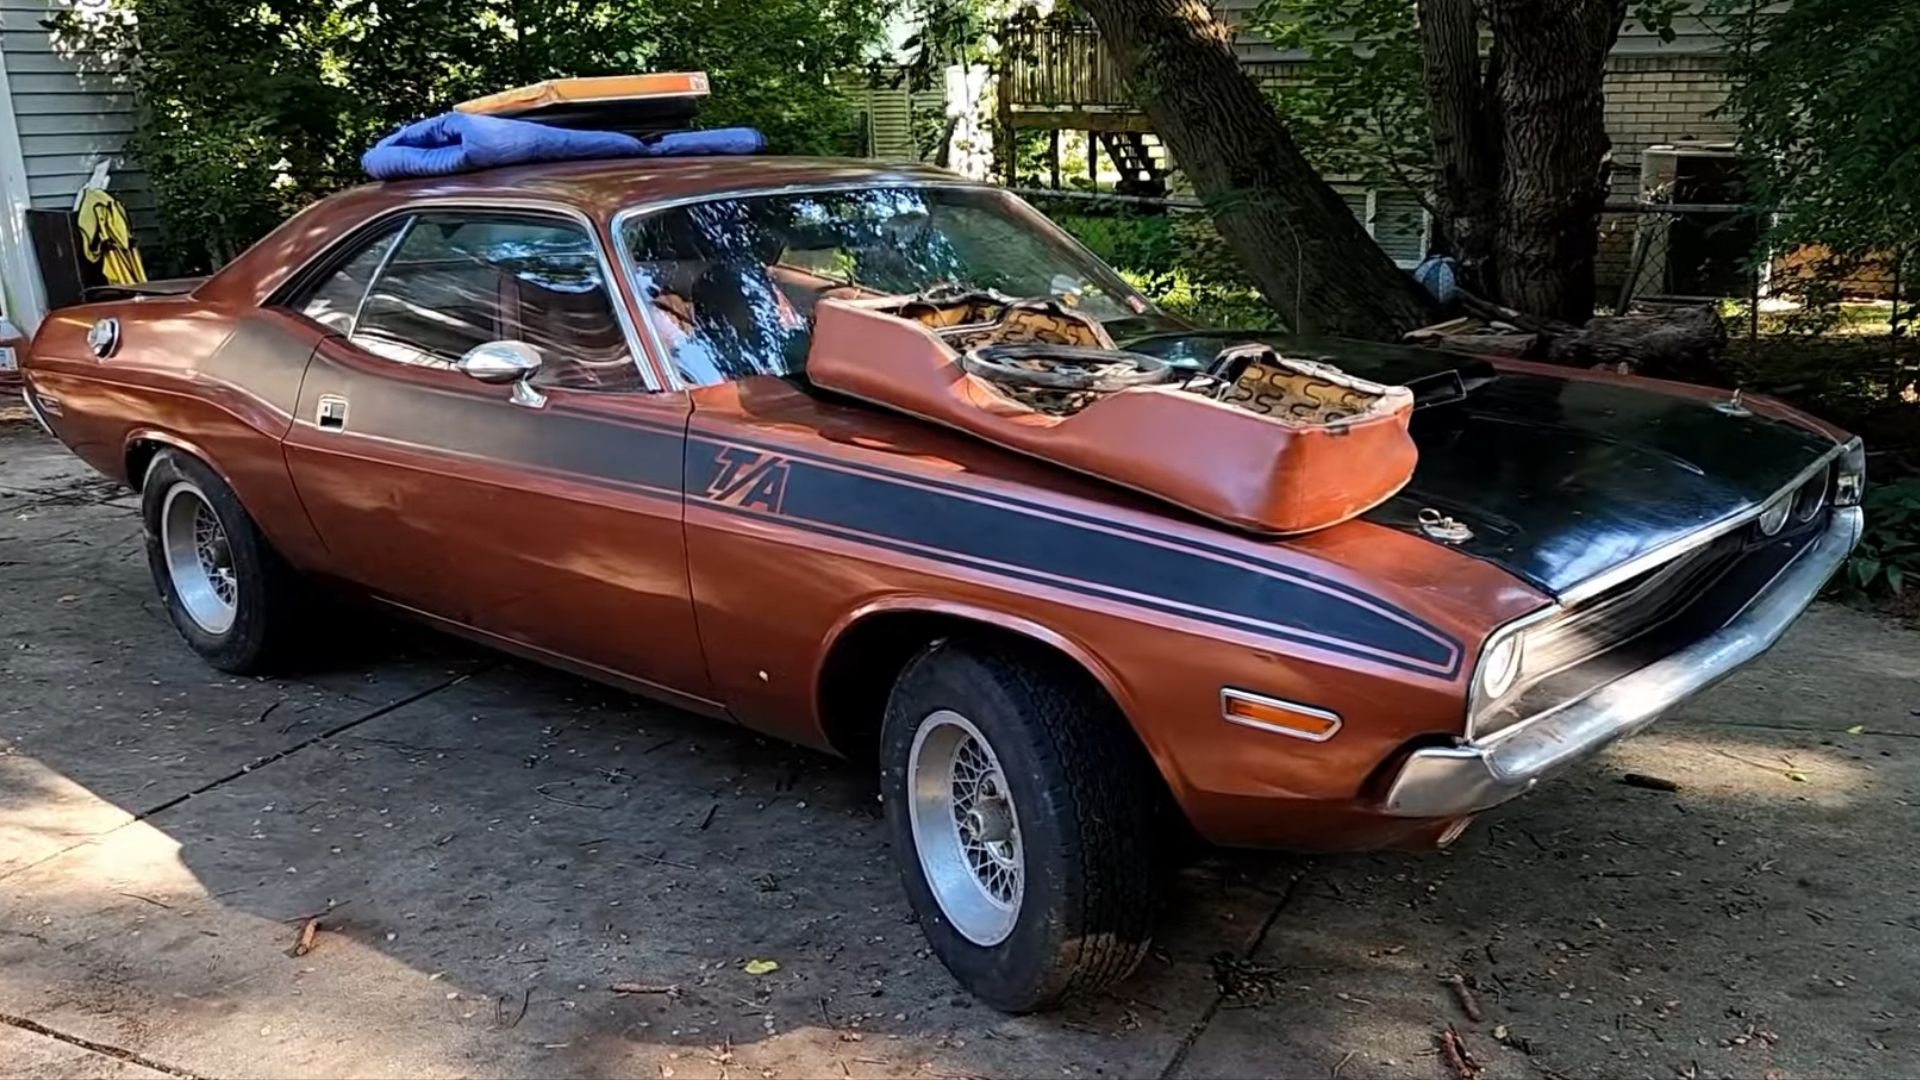 1970 Dodge Challenger T/A Gets Rescued After Sitting For Years In The Dilapidated Packard Plant In Detroit